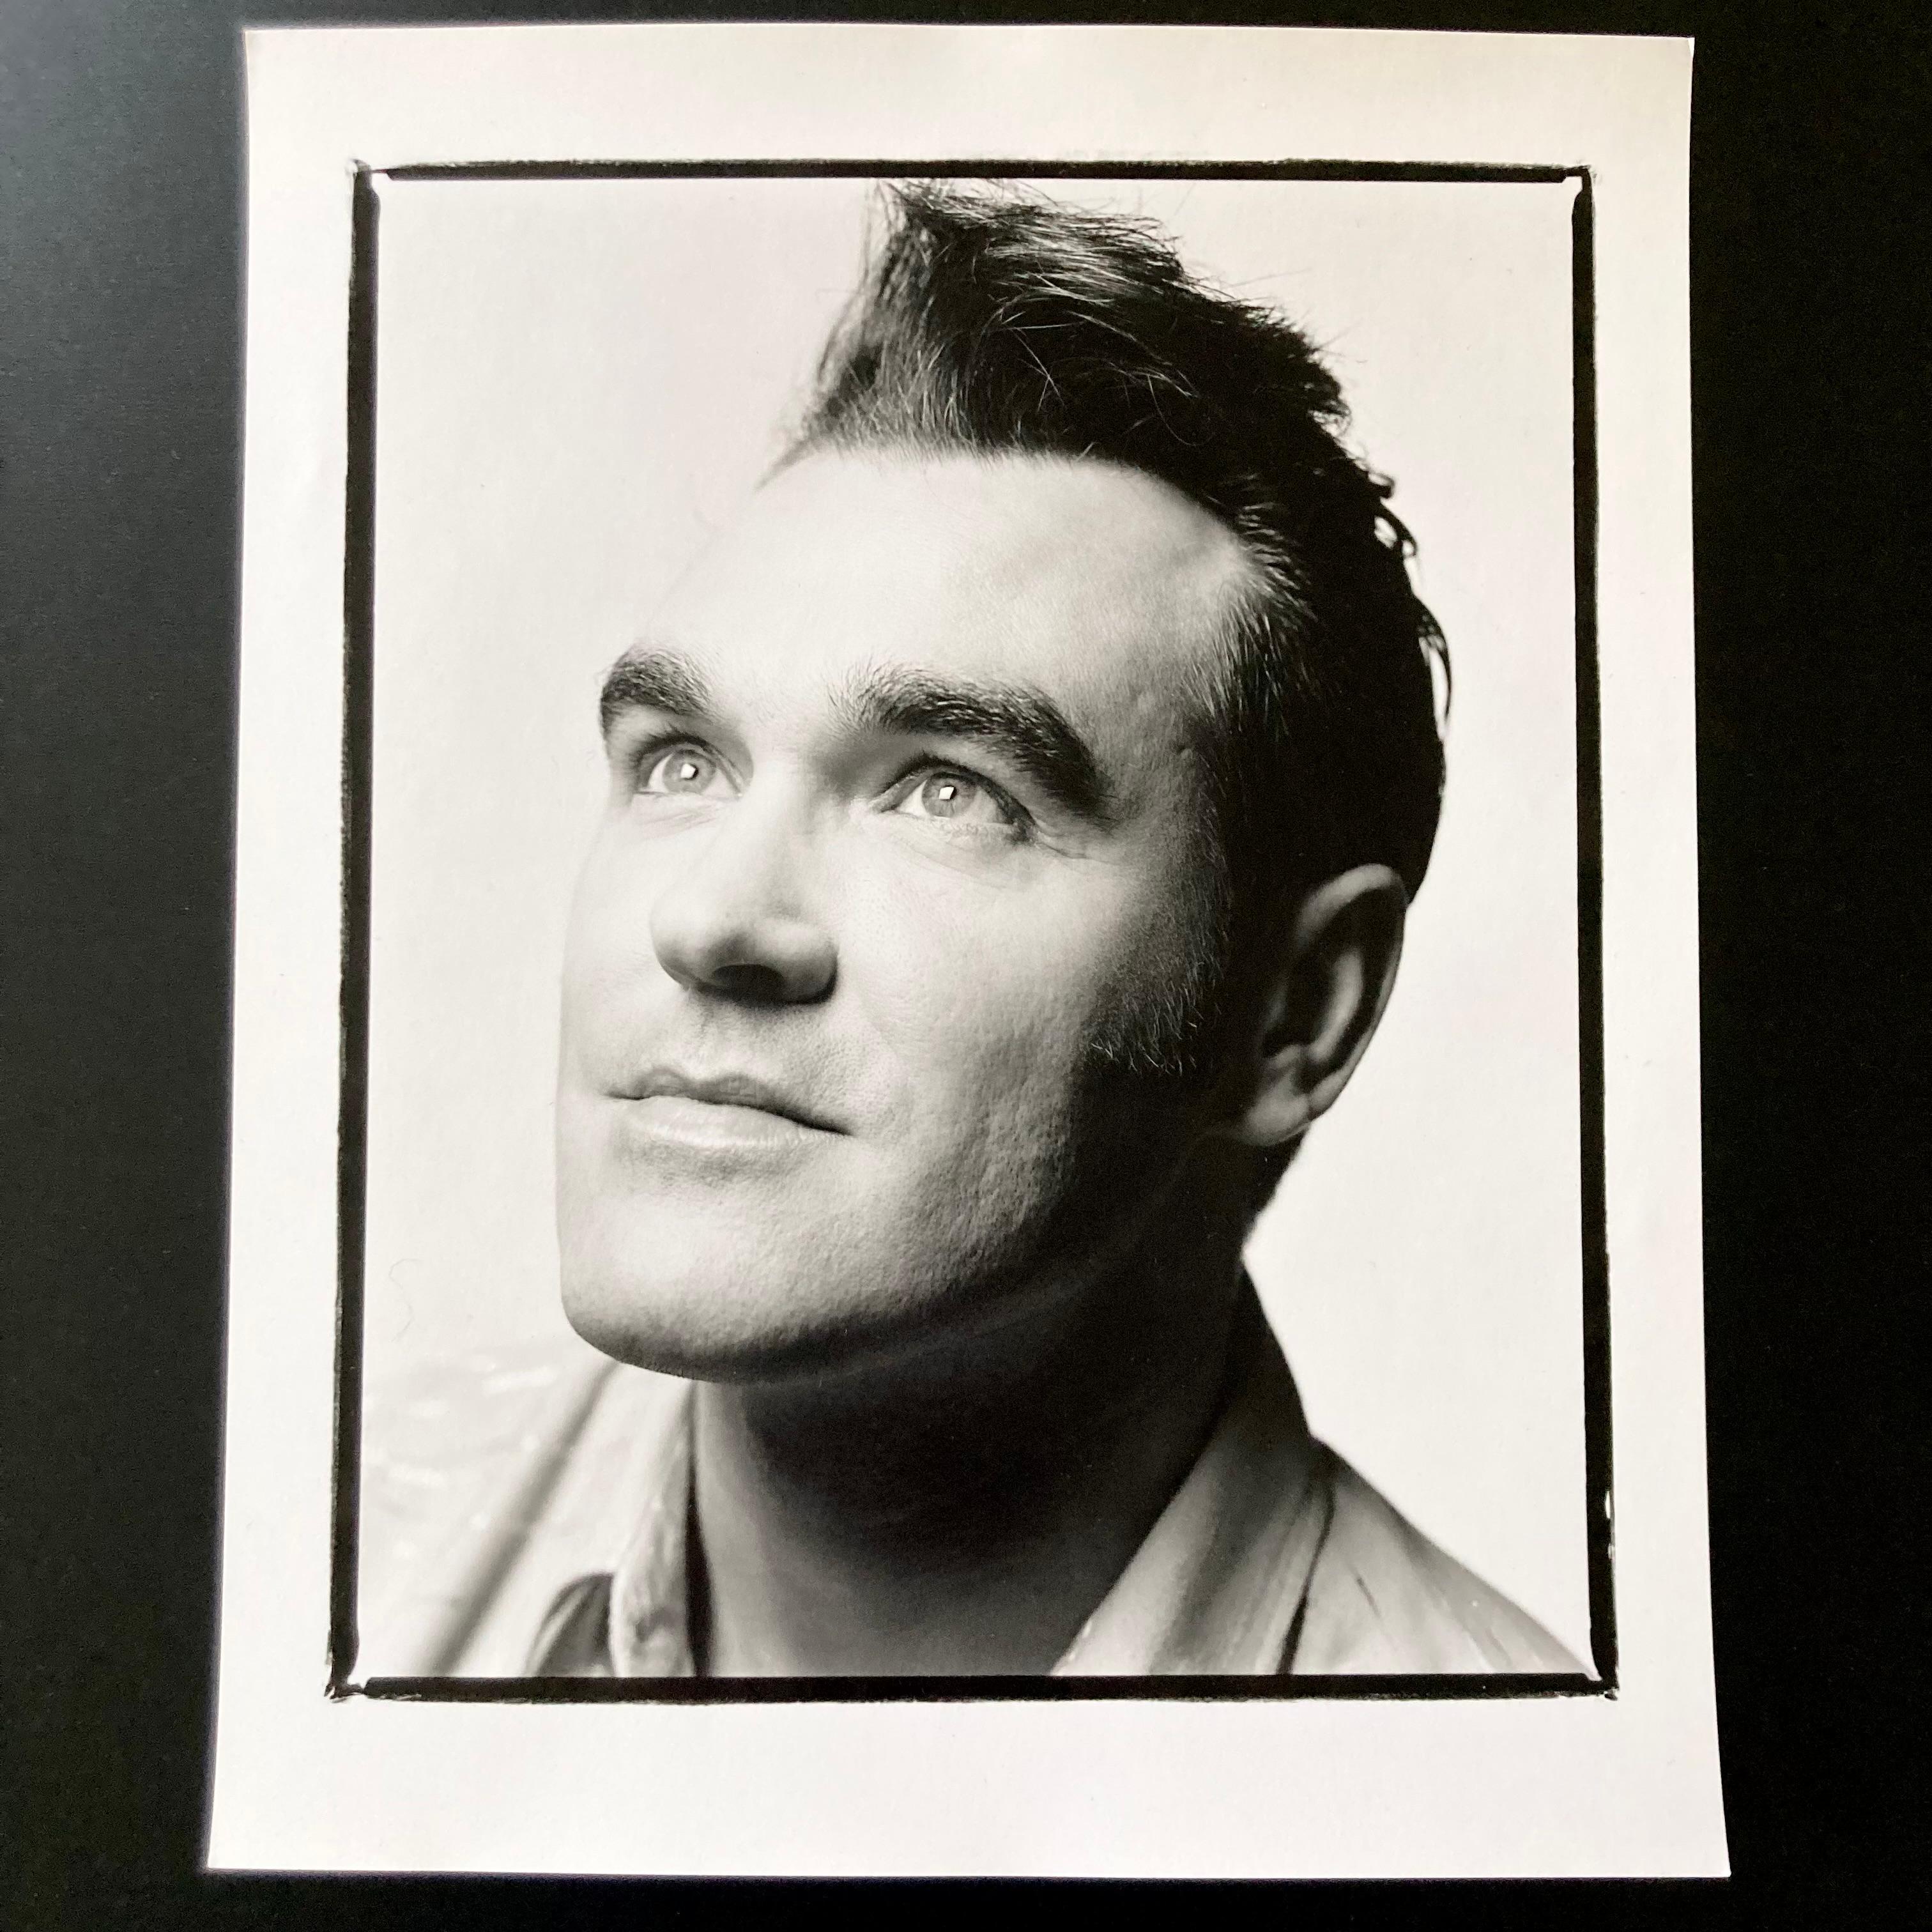 Morrissey, 8”x10” Hand-printed darkroom print, made at the time of the shoot in 1994, and stored flat in a temperature-controlled environment.

The print is in perfect new condition with no flaws. Hand-signed on the back in pencil by Chris Cuffaro. 